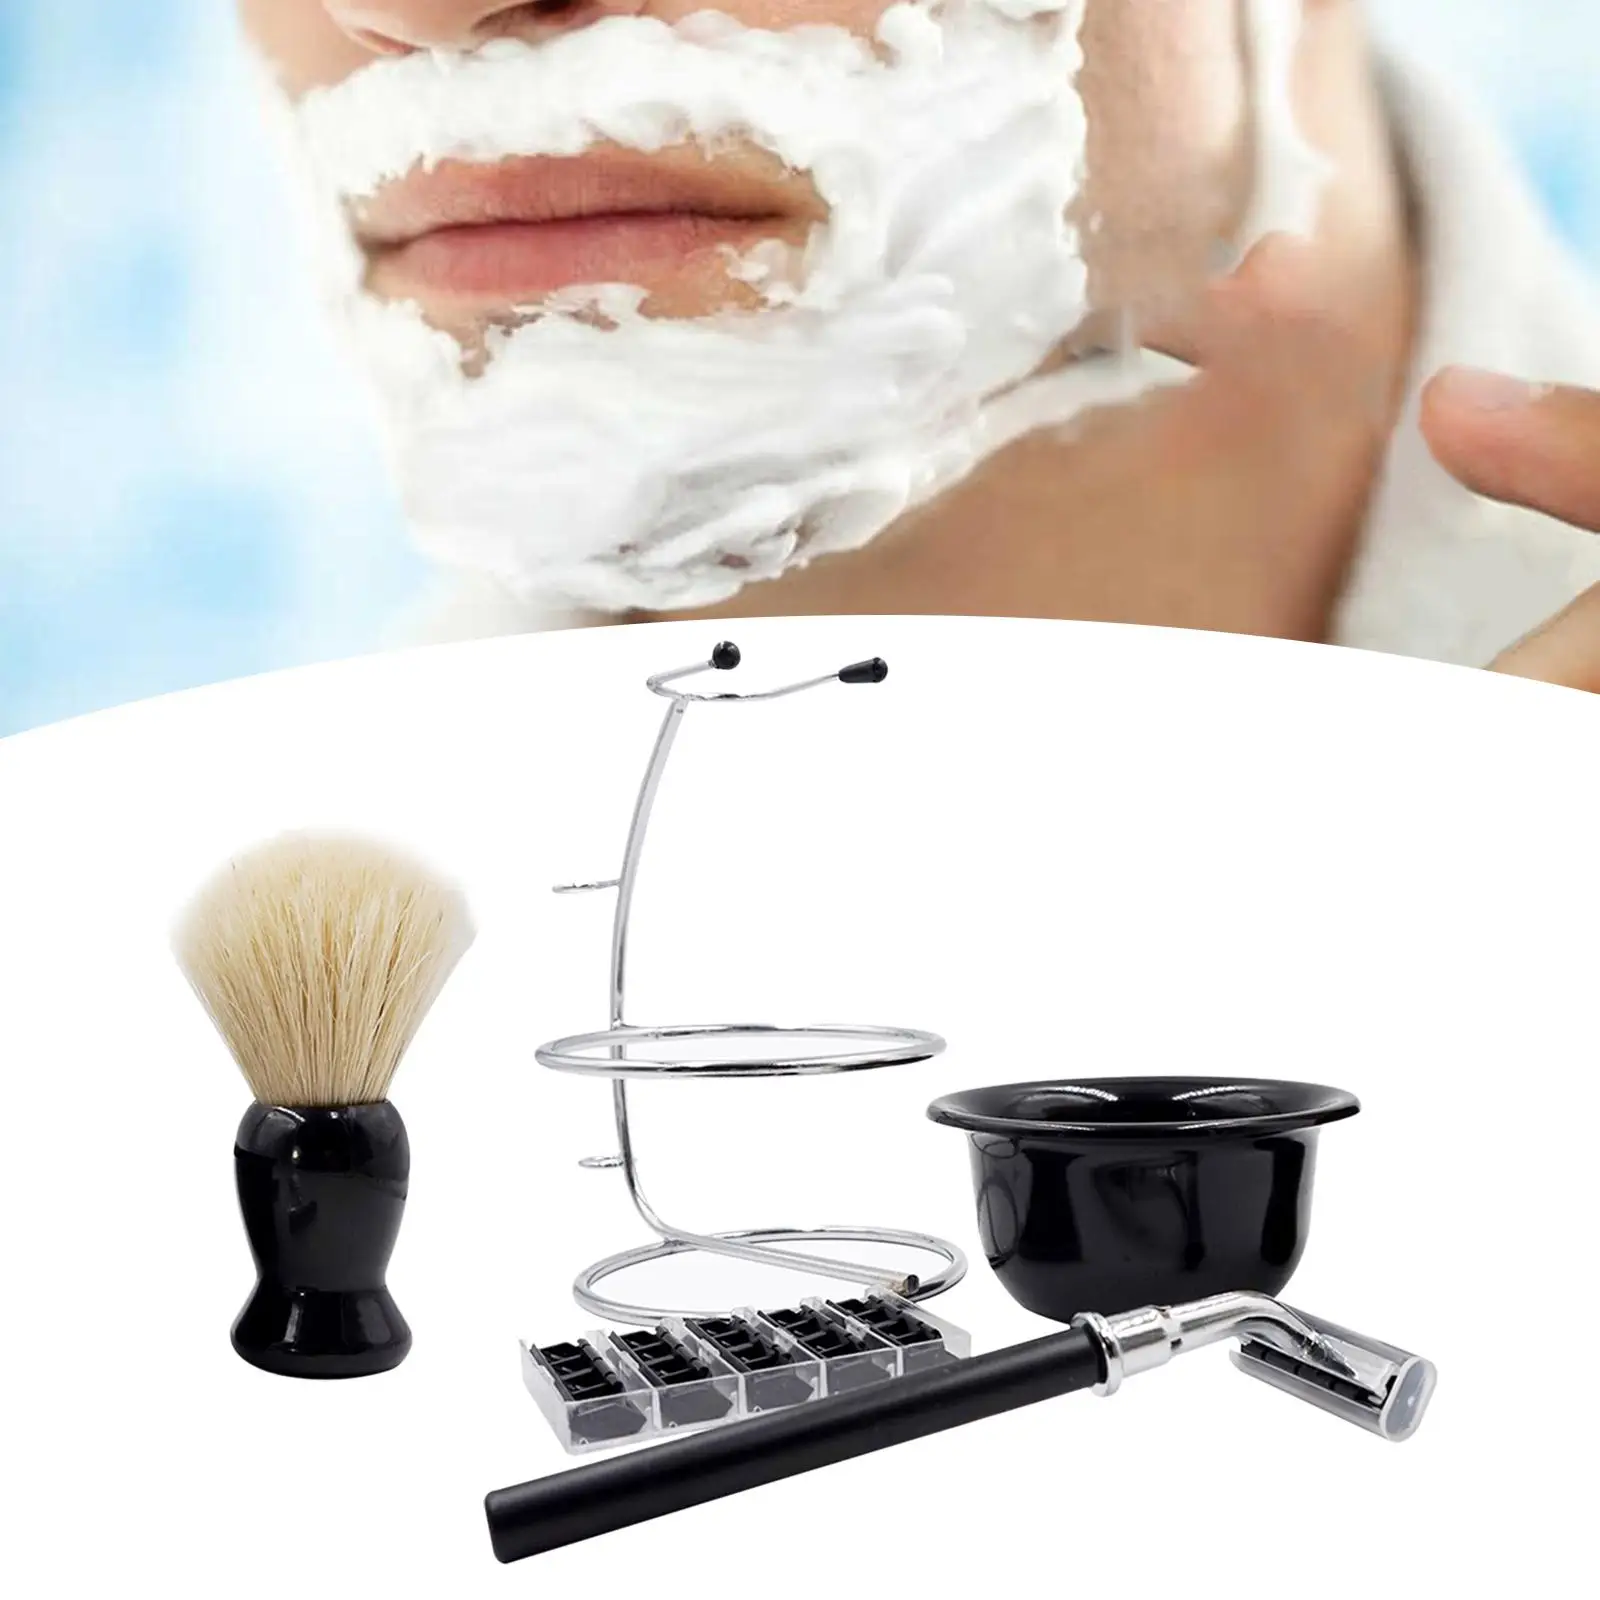 Men Shaving Set Manual Stand Brush Bowl Set Weighted Bottom Accessory